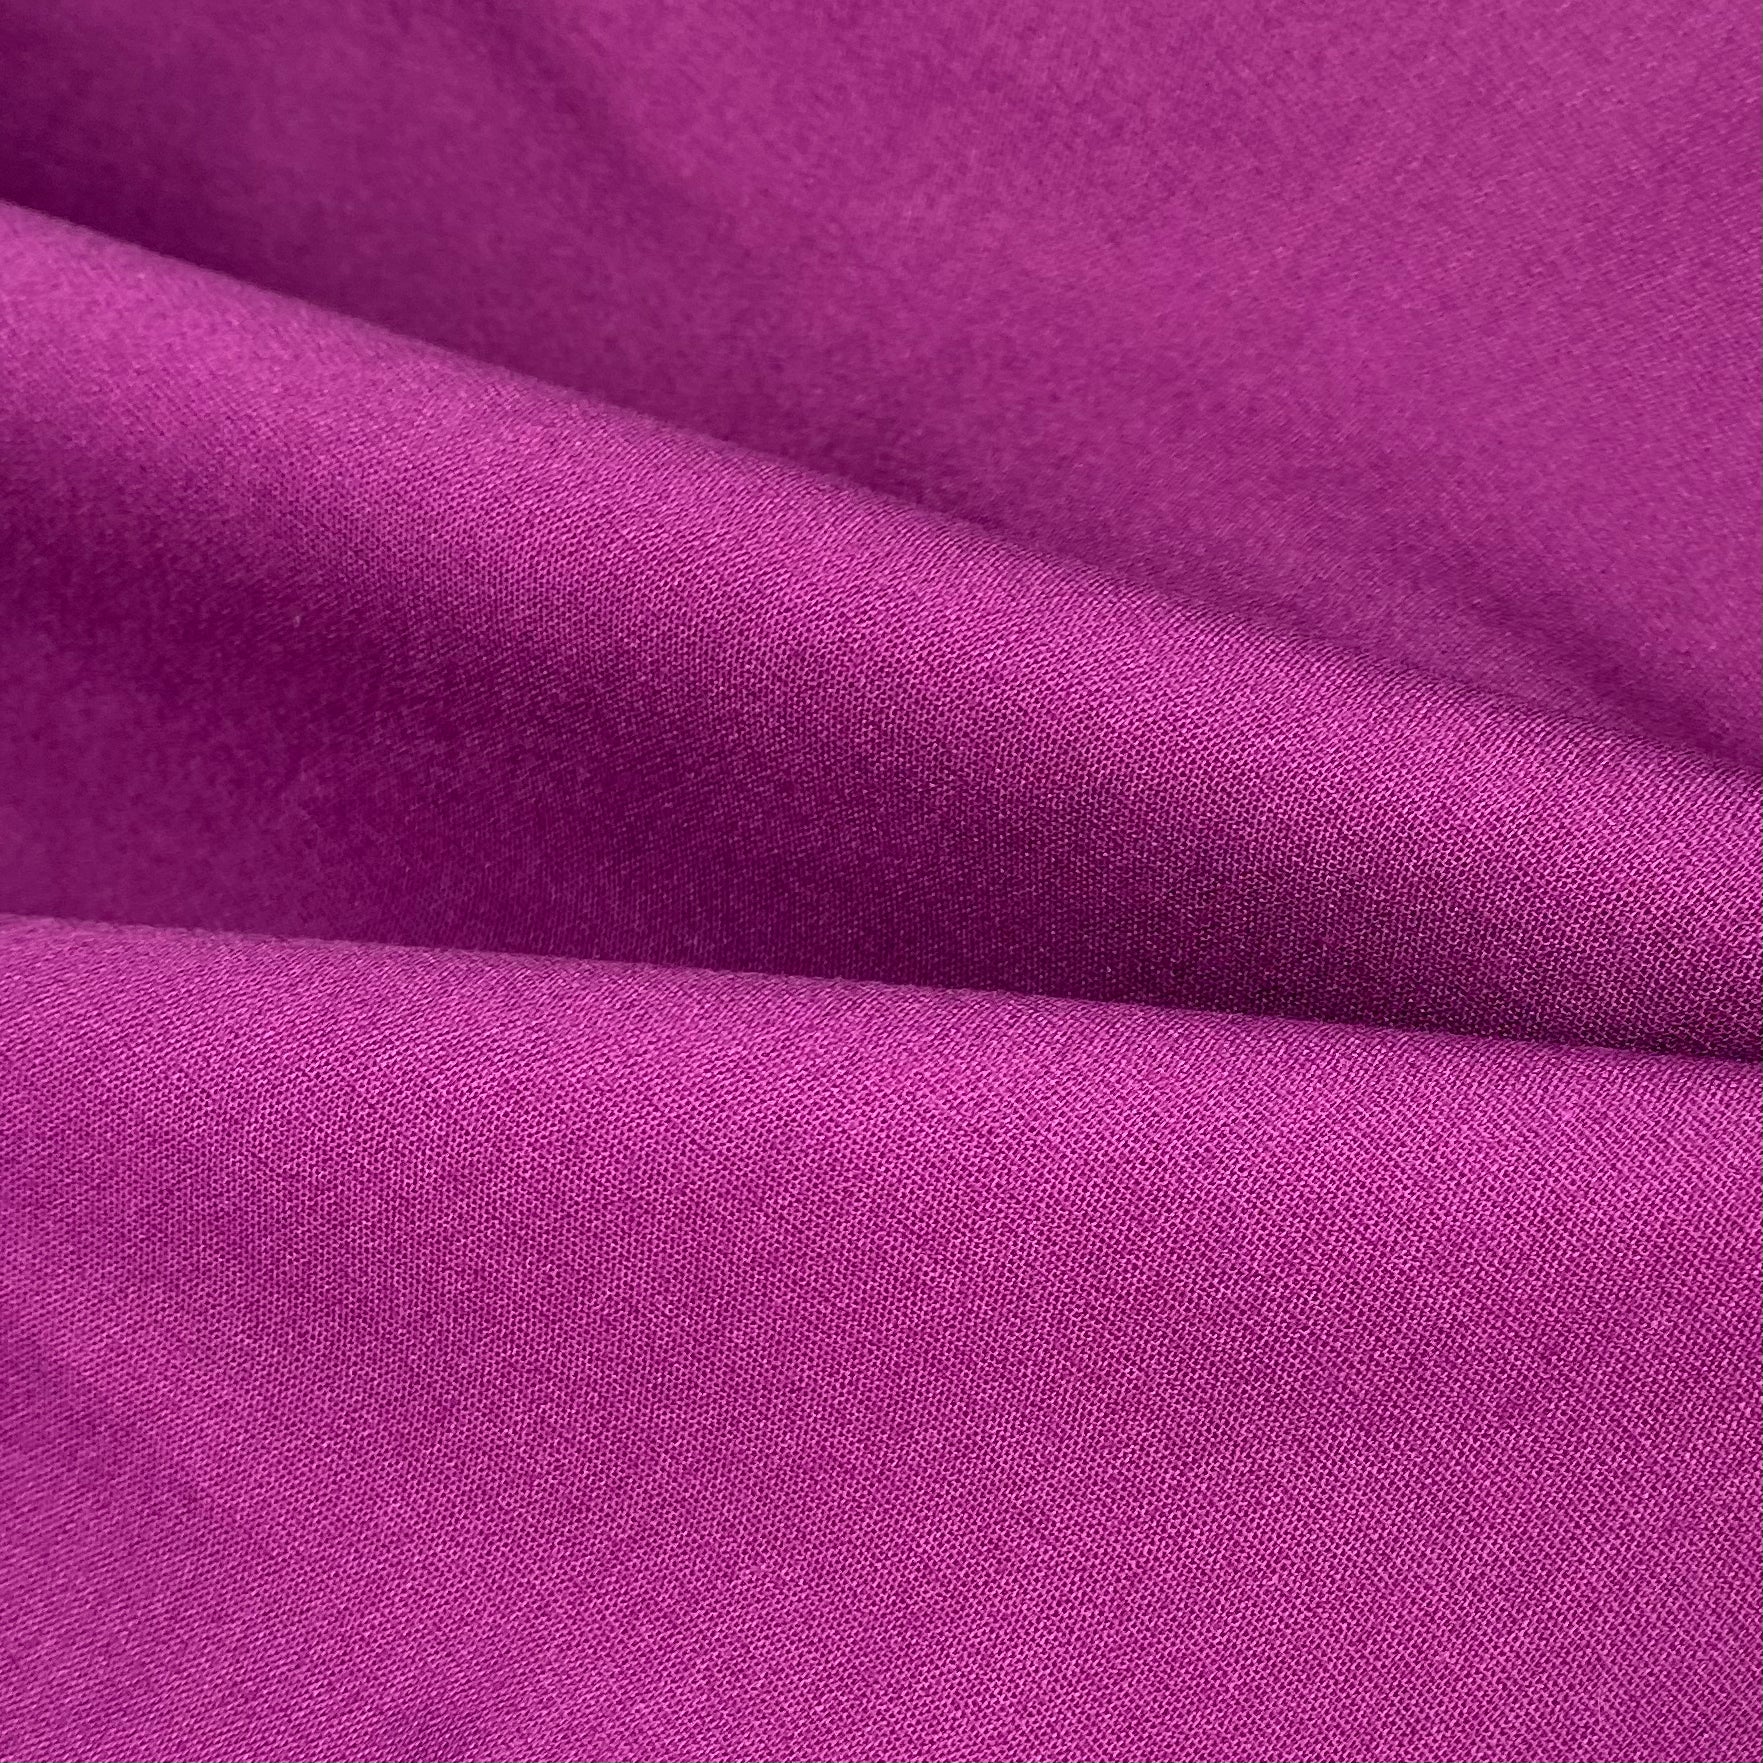 Polyester/Cotton Broadcloth - 63” - Purple